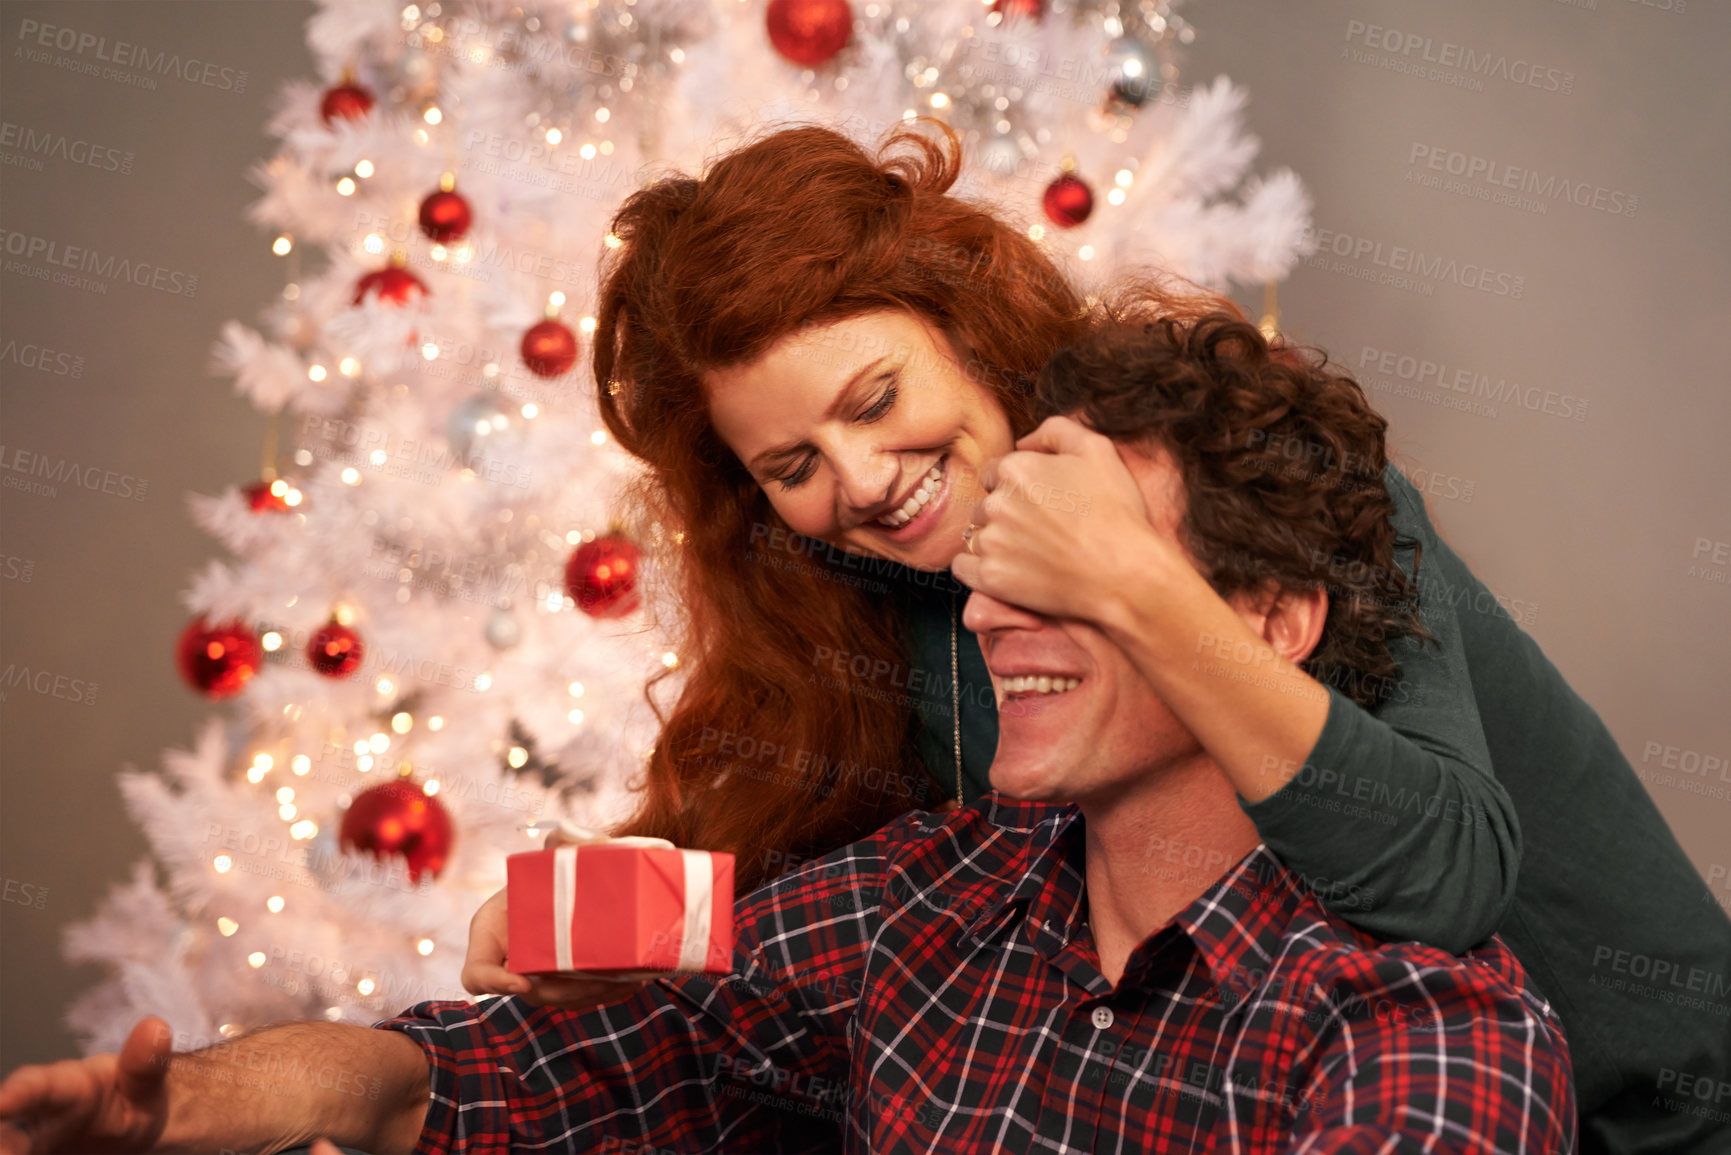 Buy stock photo Cropped shot of an affectionate woman surprising her husband with a gift at Christmas